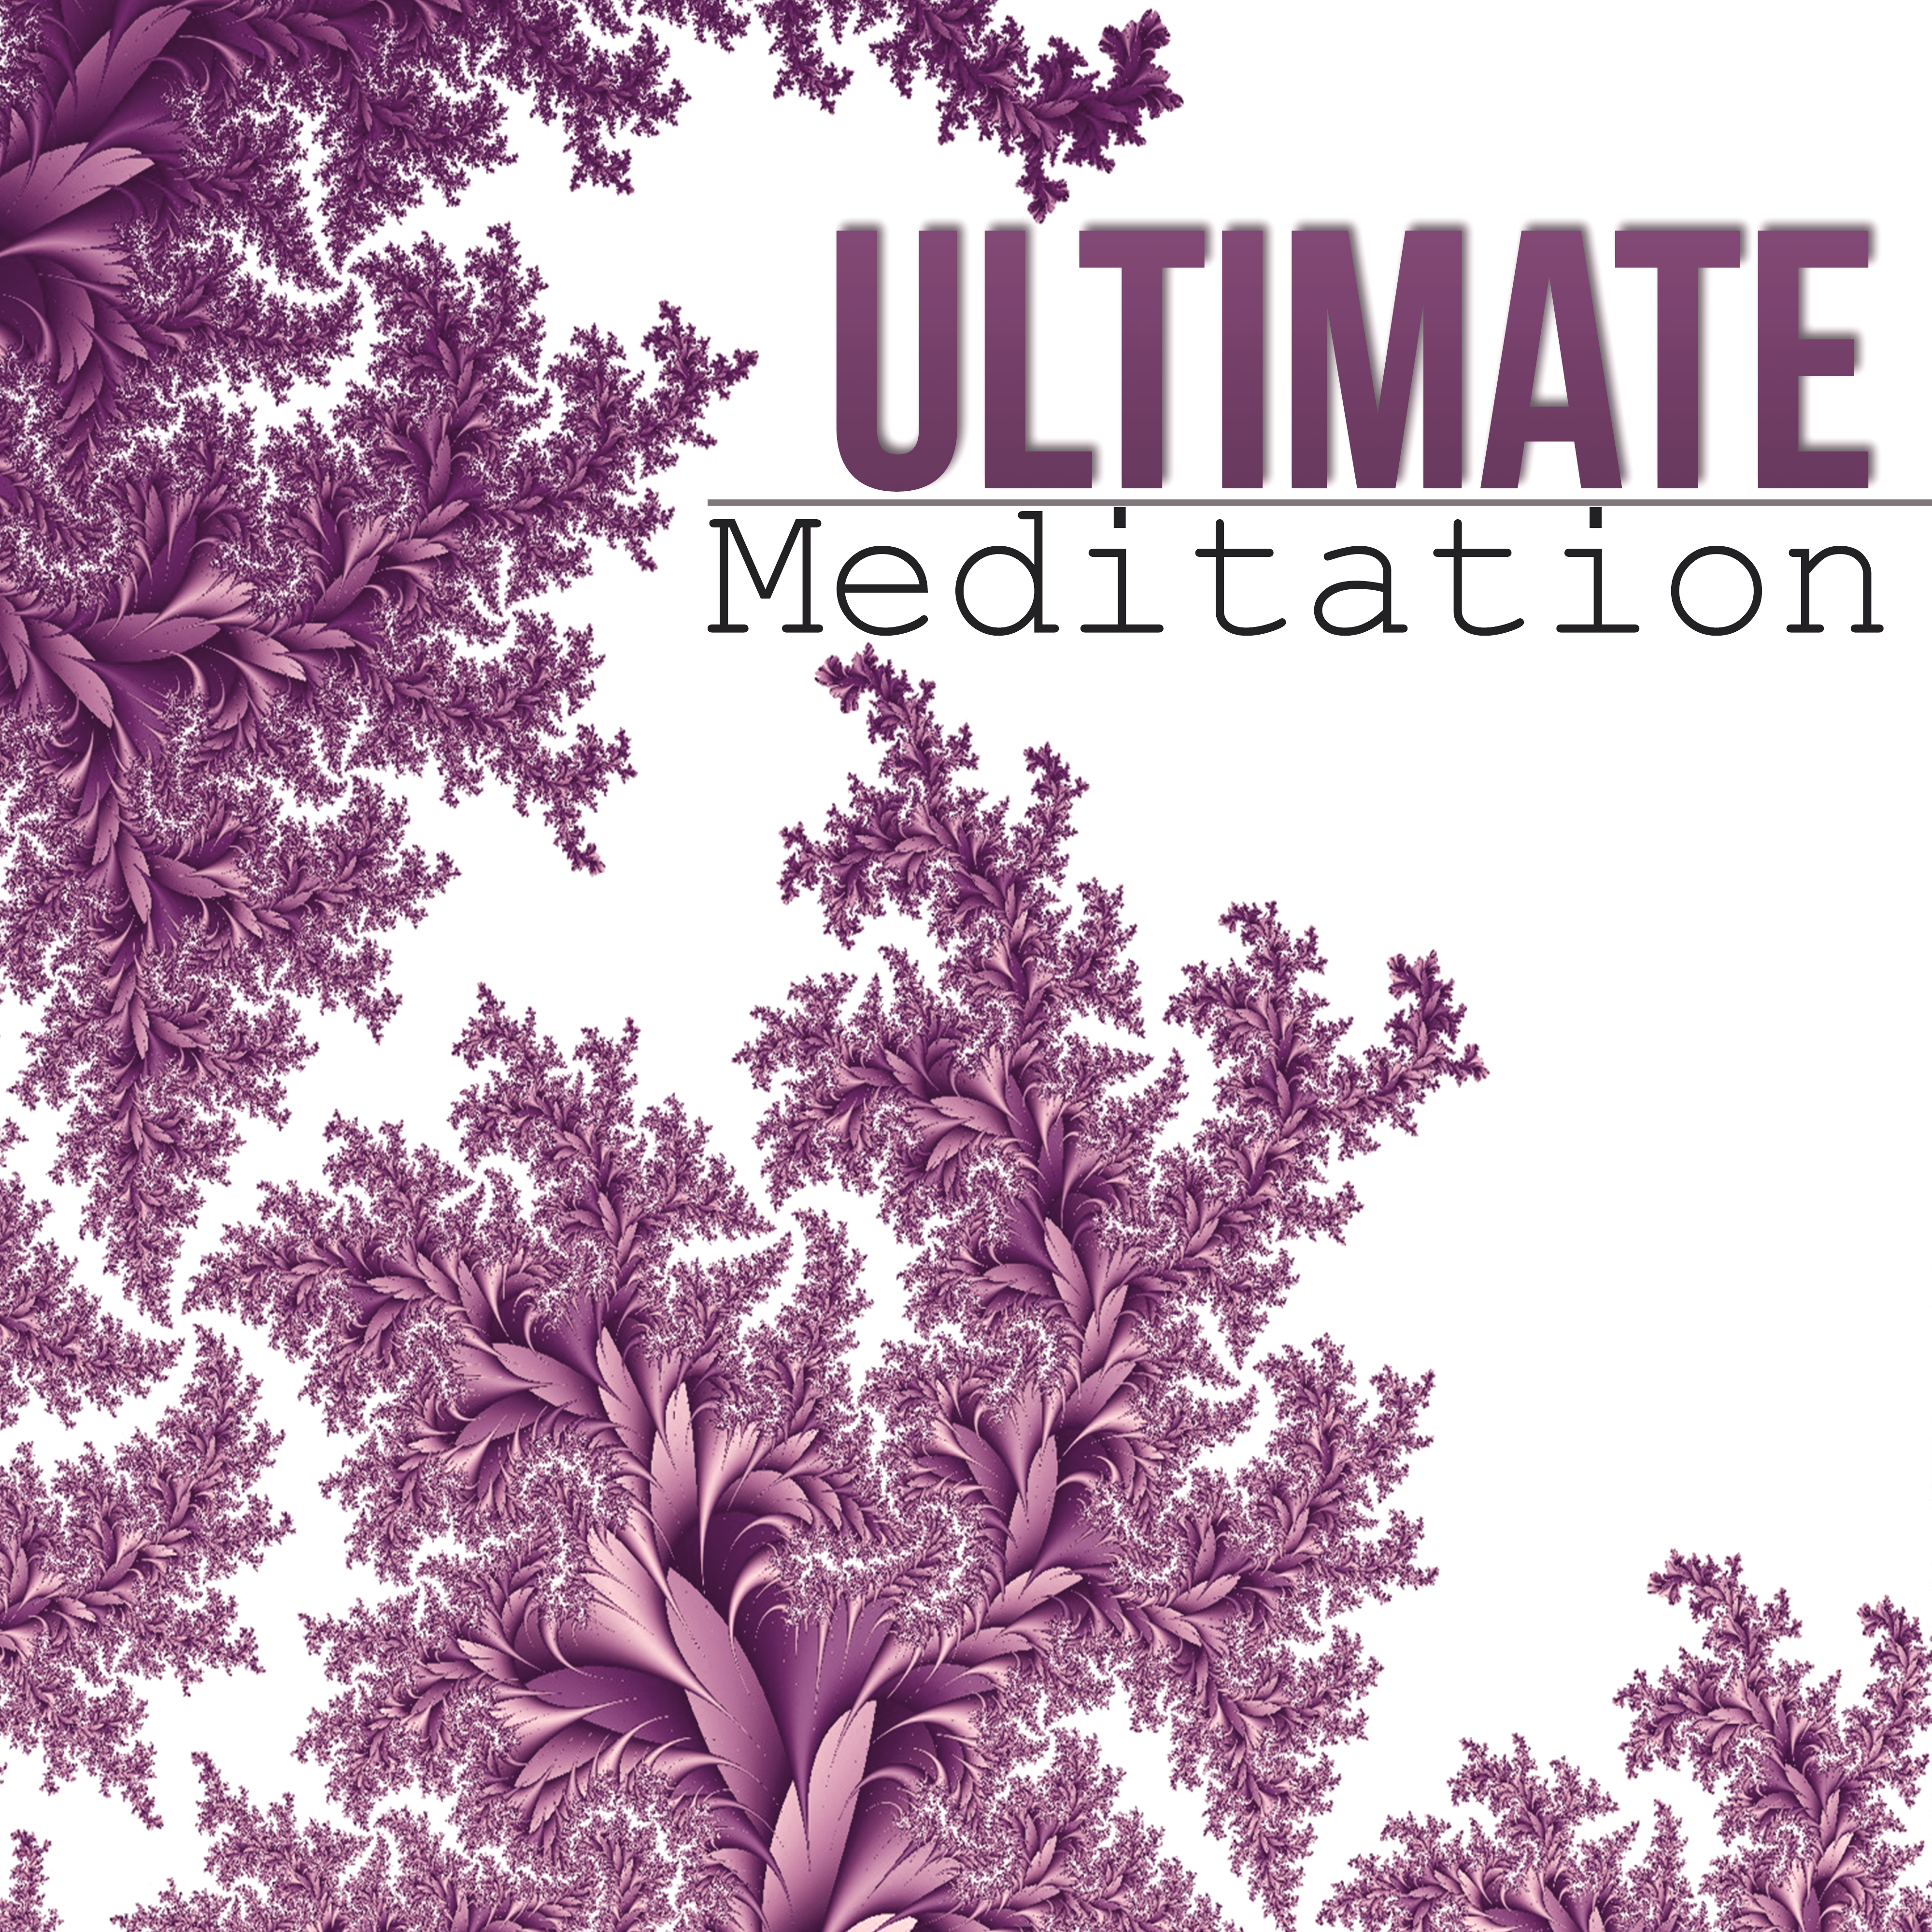 Ultimate Meditation - Sound Healing Meditation Music Therapy for Relaxation, Pure Yoga with Background Music Ocean & Nature Sounds, Inner Balance, Restful Sleep, Reiki Healing